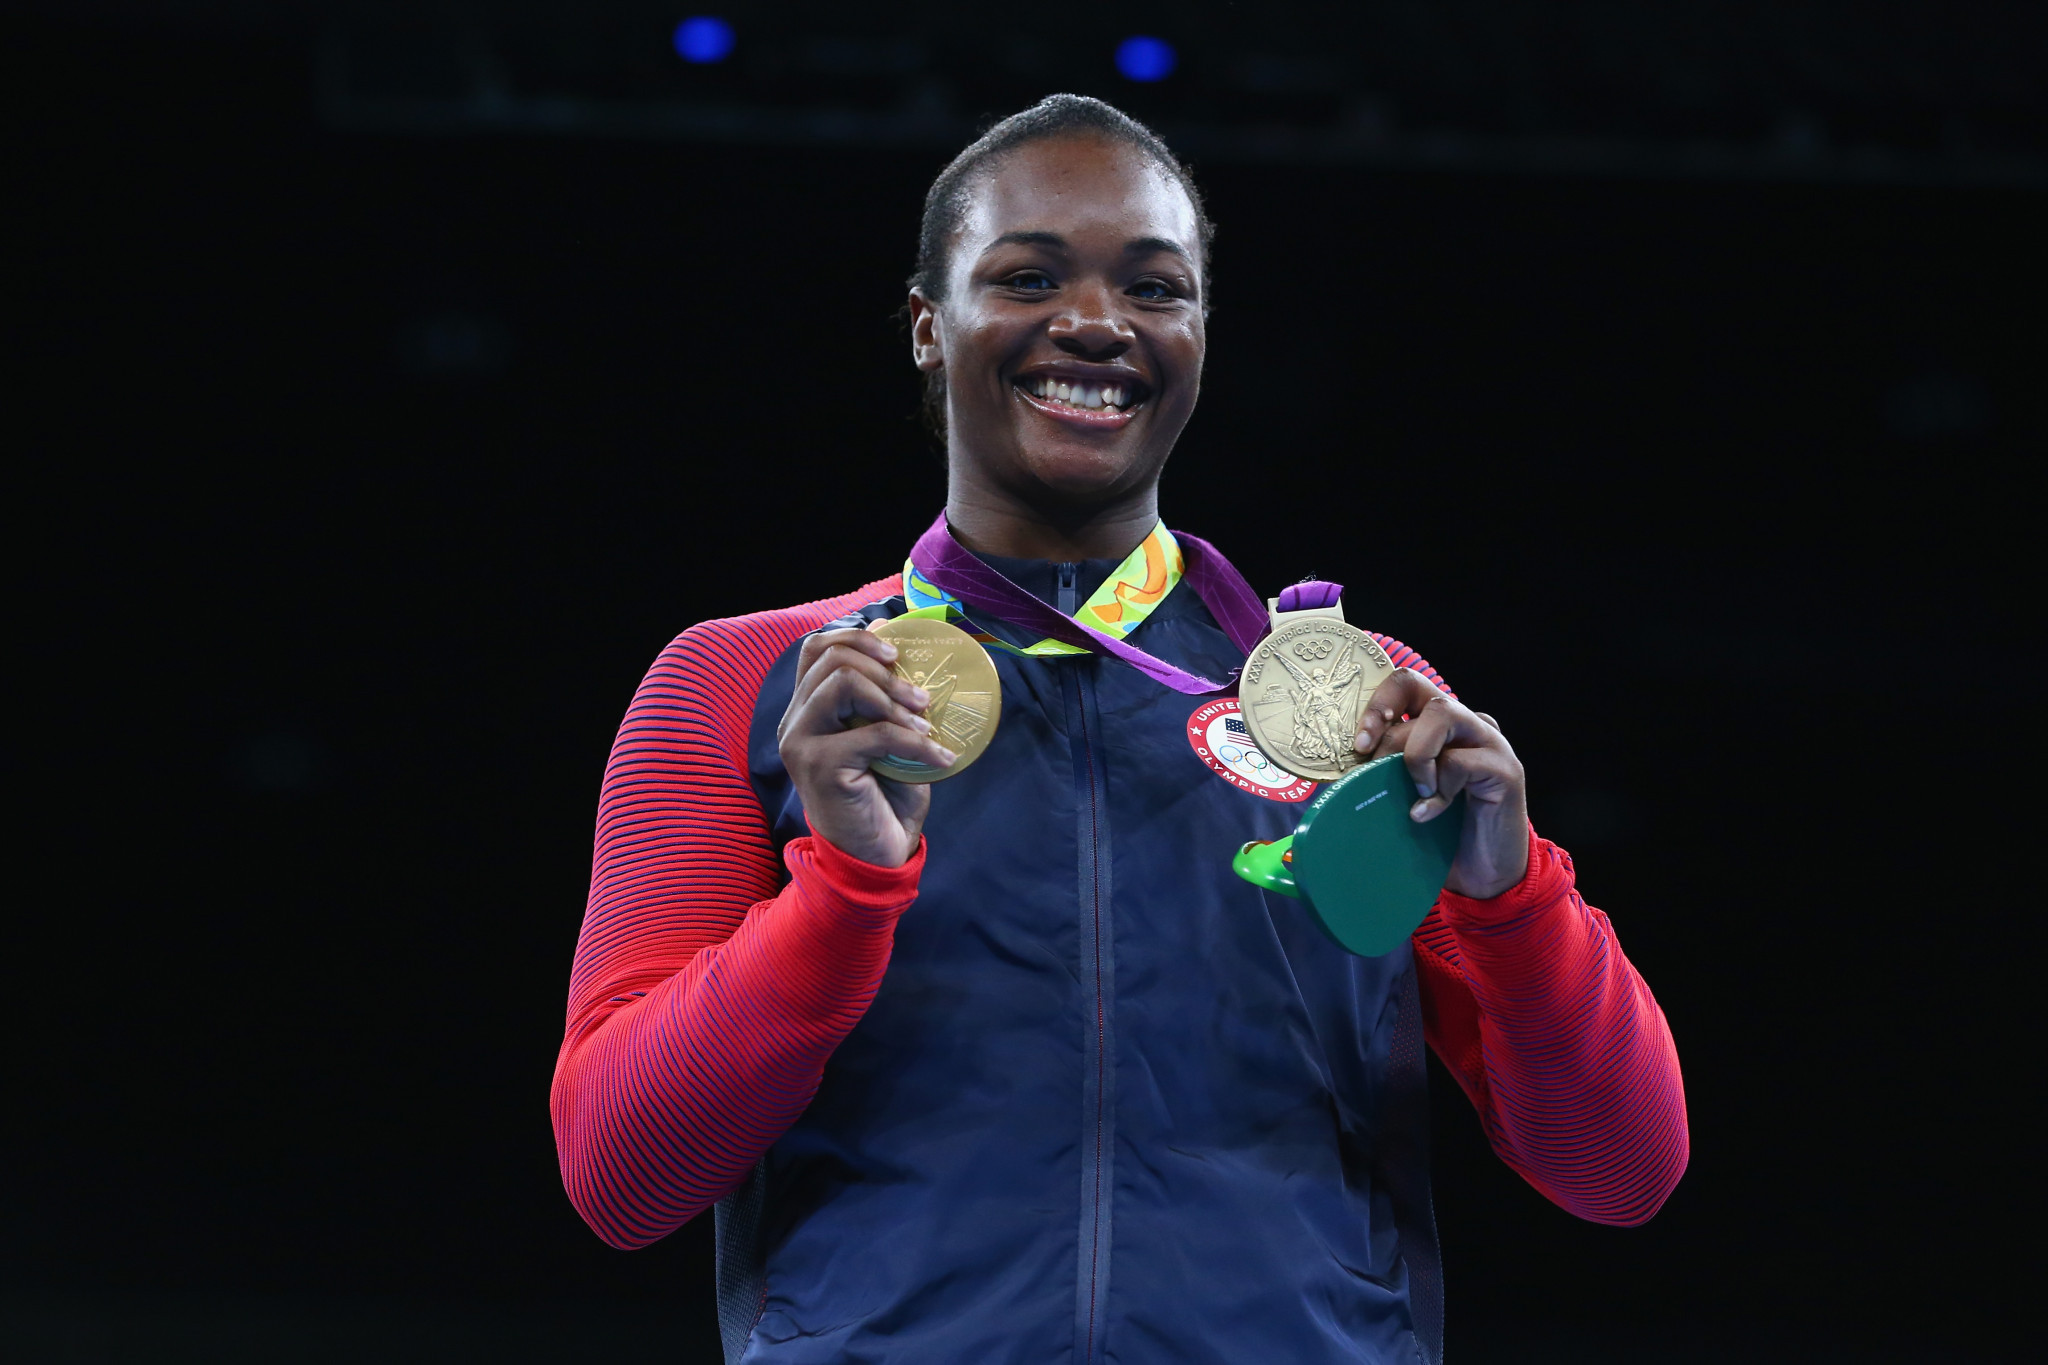 American Claressa Shields became the first woman to win the Val Barker Trophy at Rio 2016, sharing the award with Uzbekistan's Hasanboy Dusmatov ©Getty Images